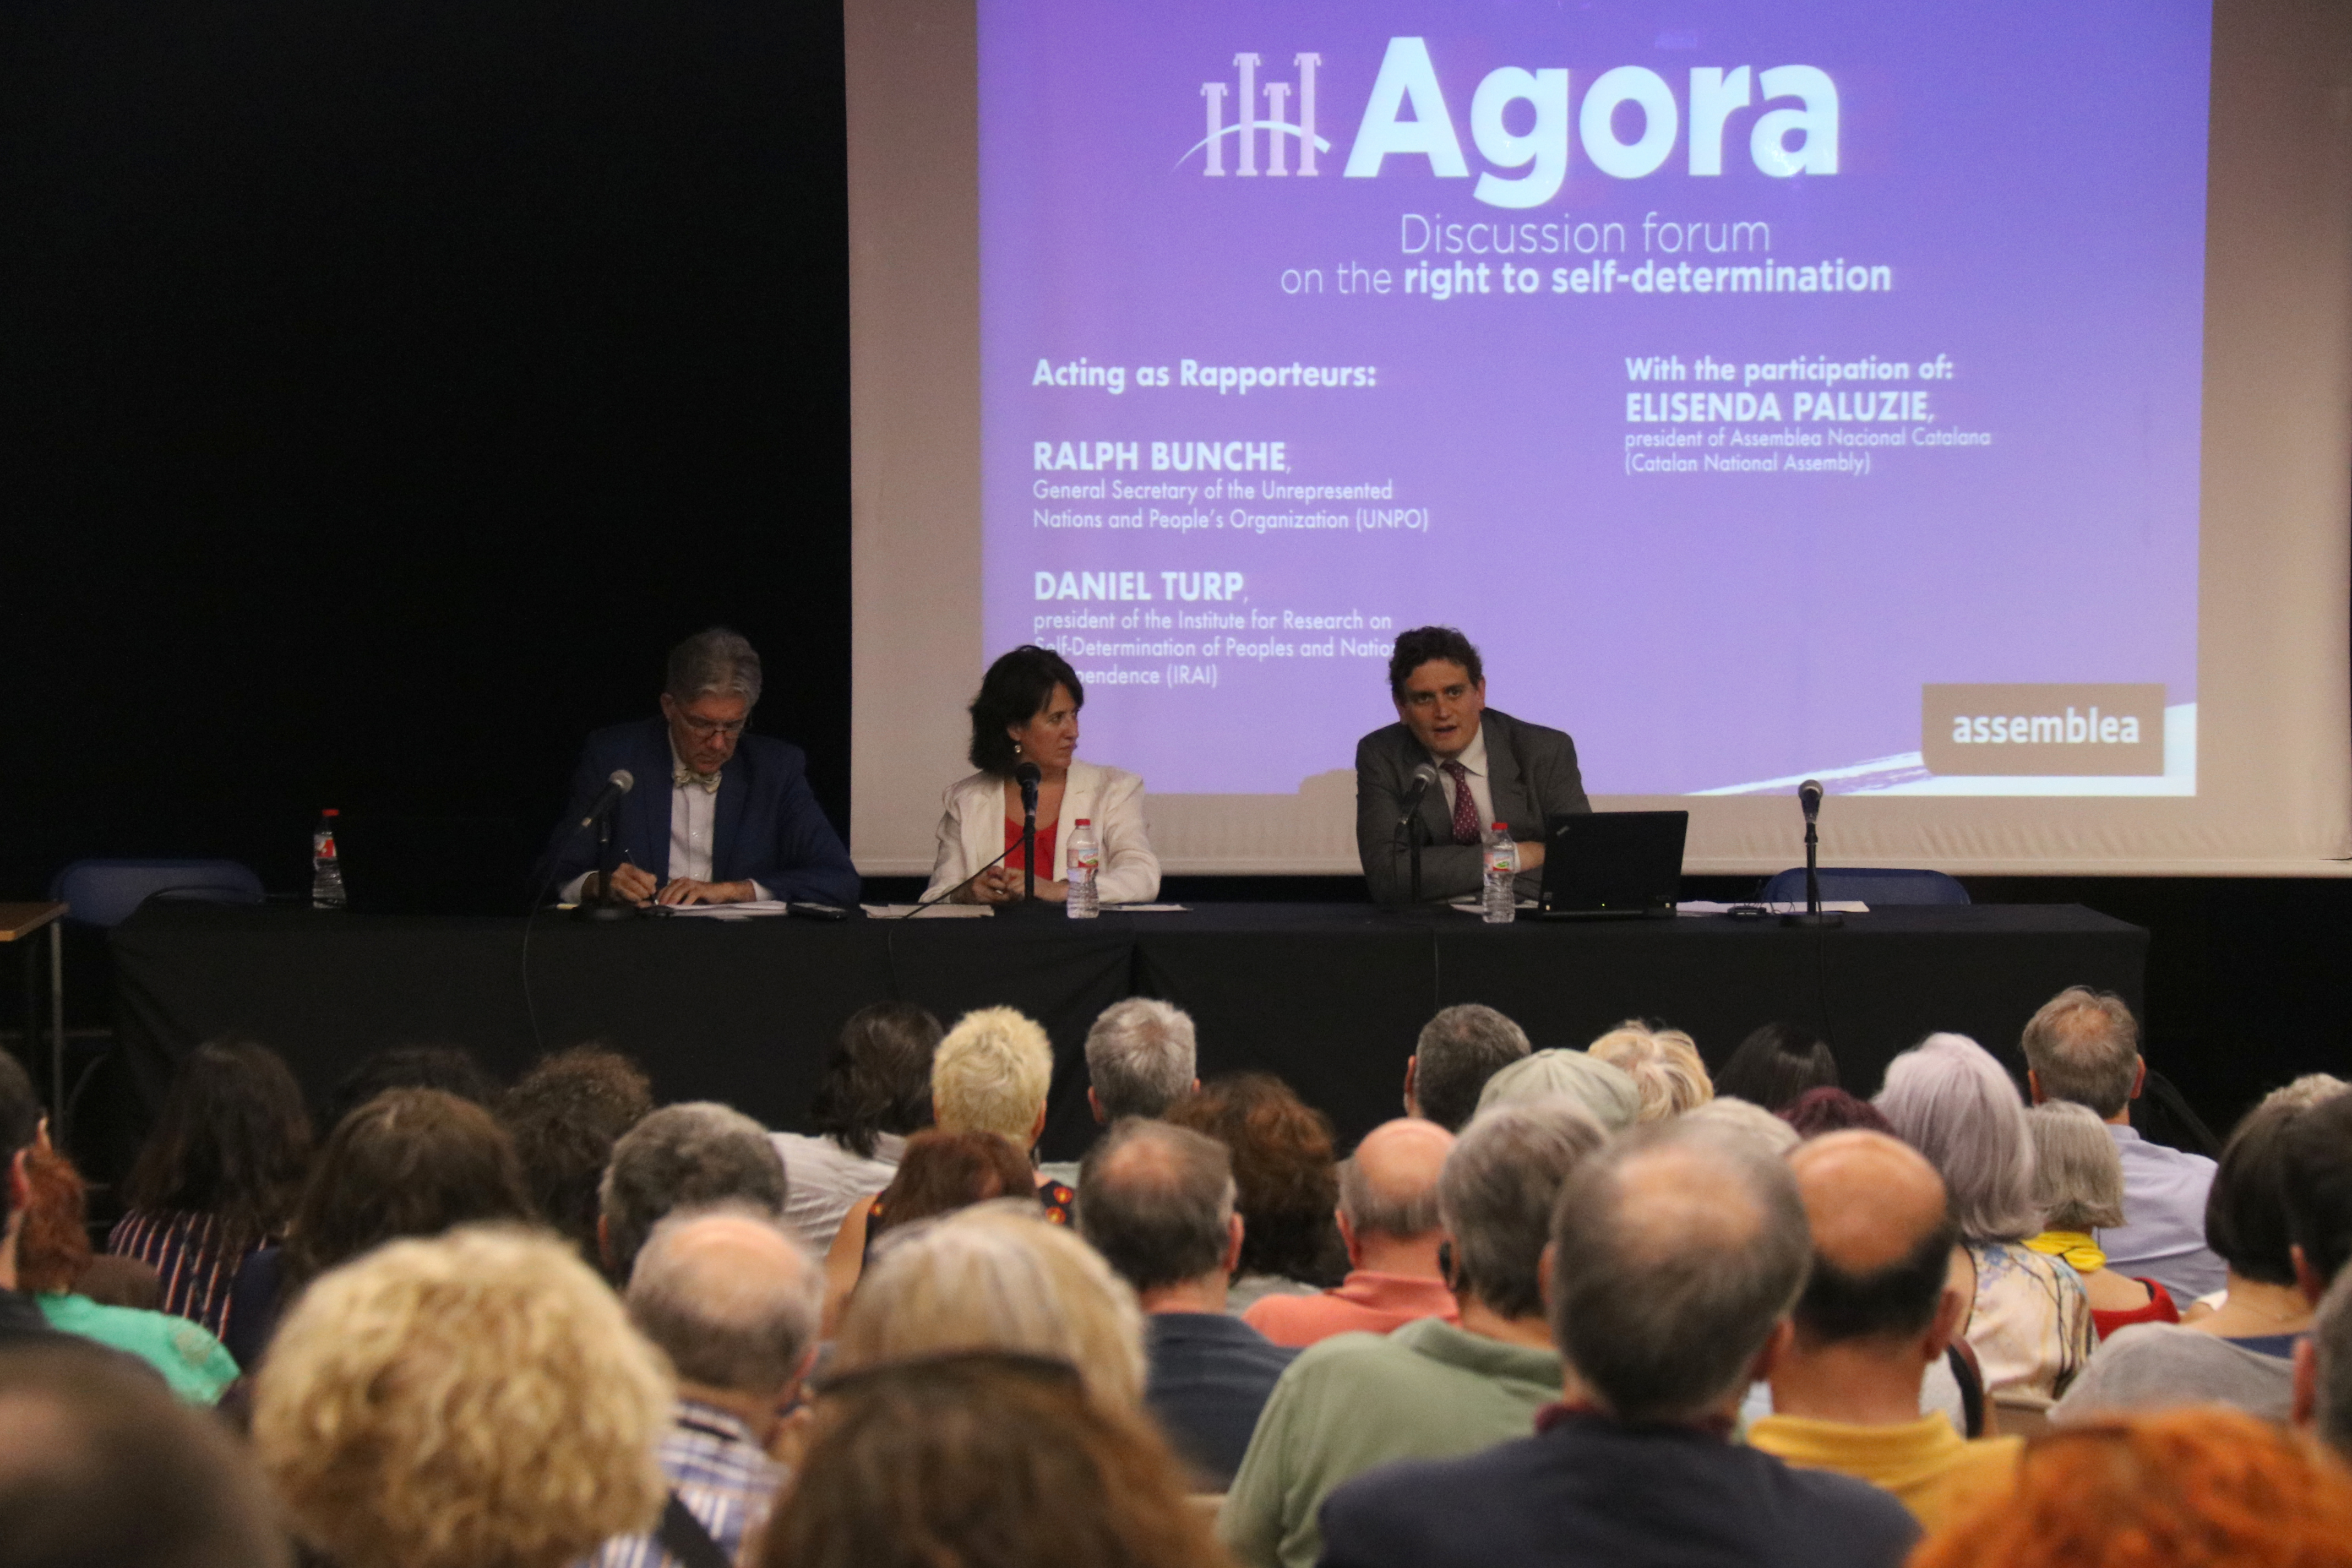 Daniel Turp, Elisenda Paluzie and Ralph Bunche at the talk organized by ANC on 25 June, 2019 (Mariona Puig/ACN)